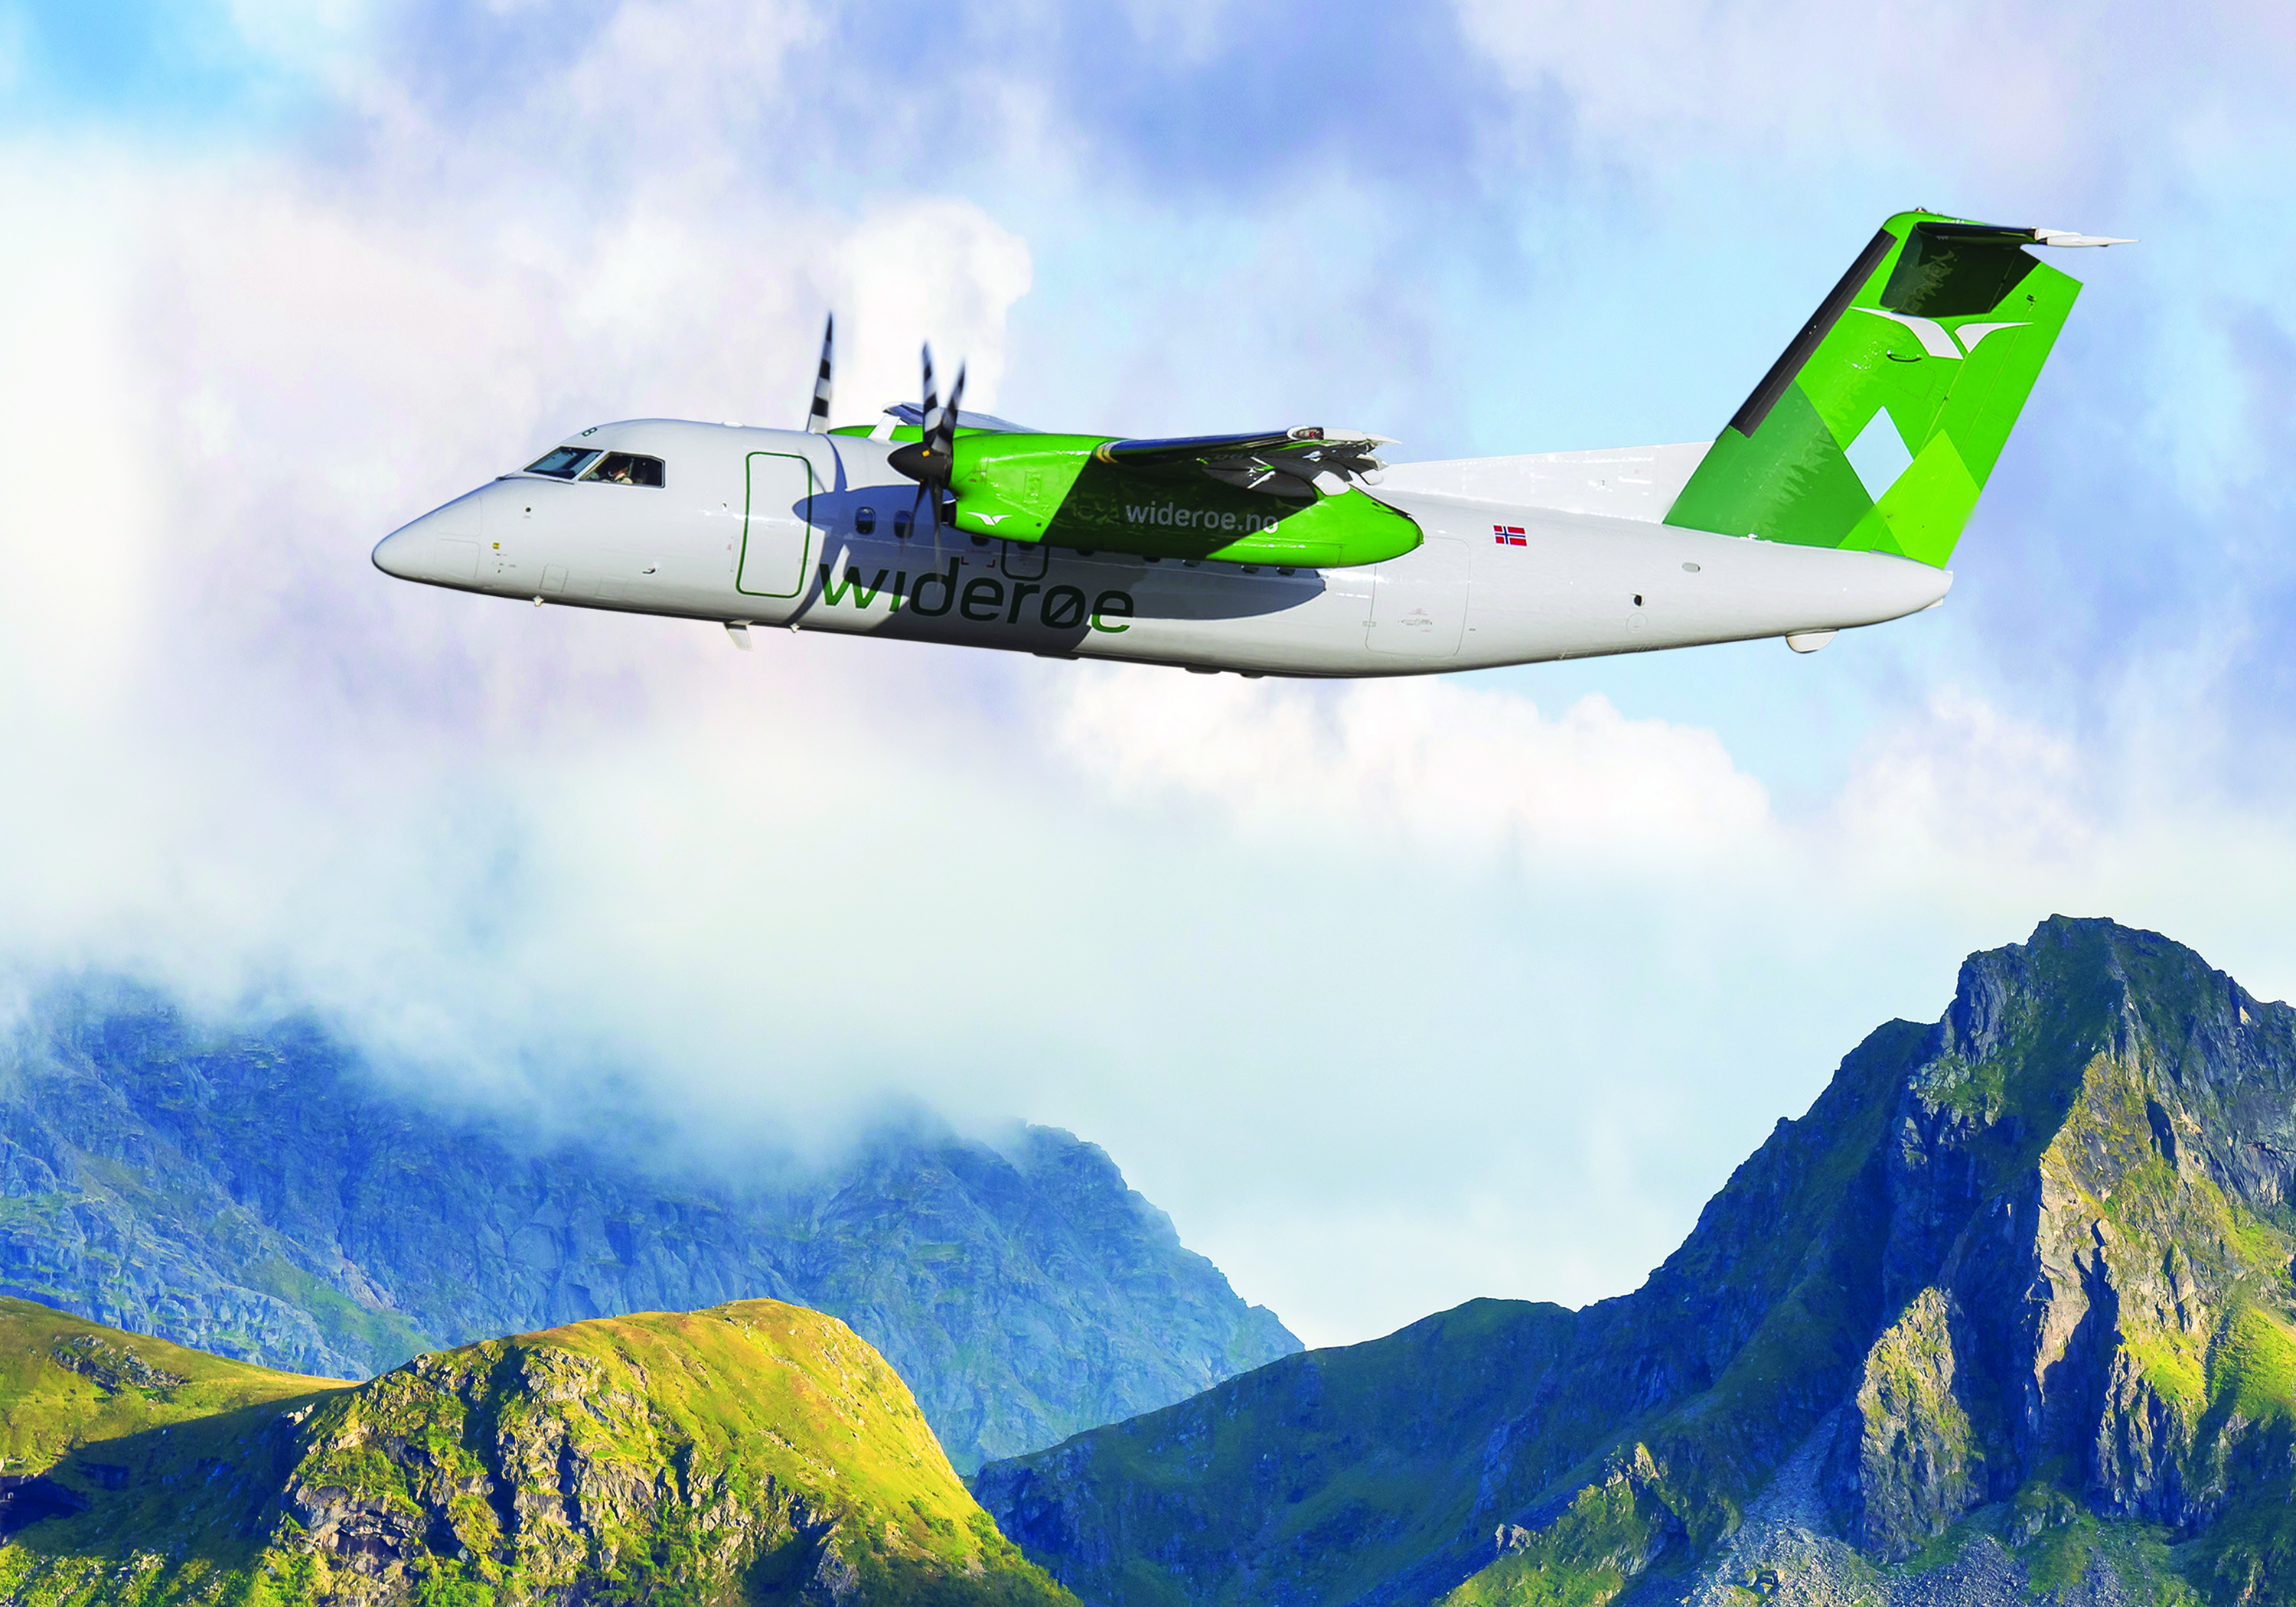 Industry-First Extended Service Program PLUS Doubles the service life of the De Havilland Canada Dash 8-100